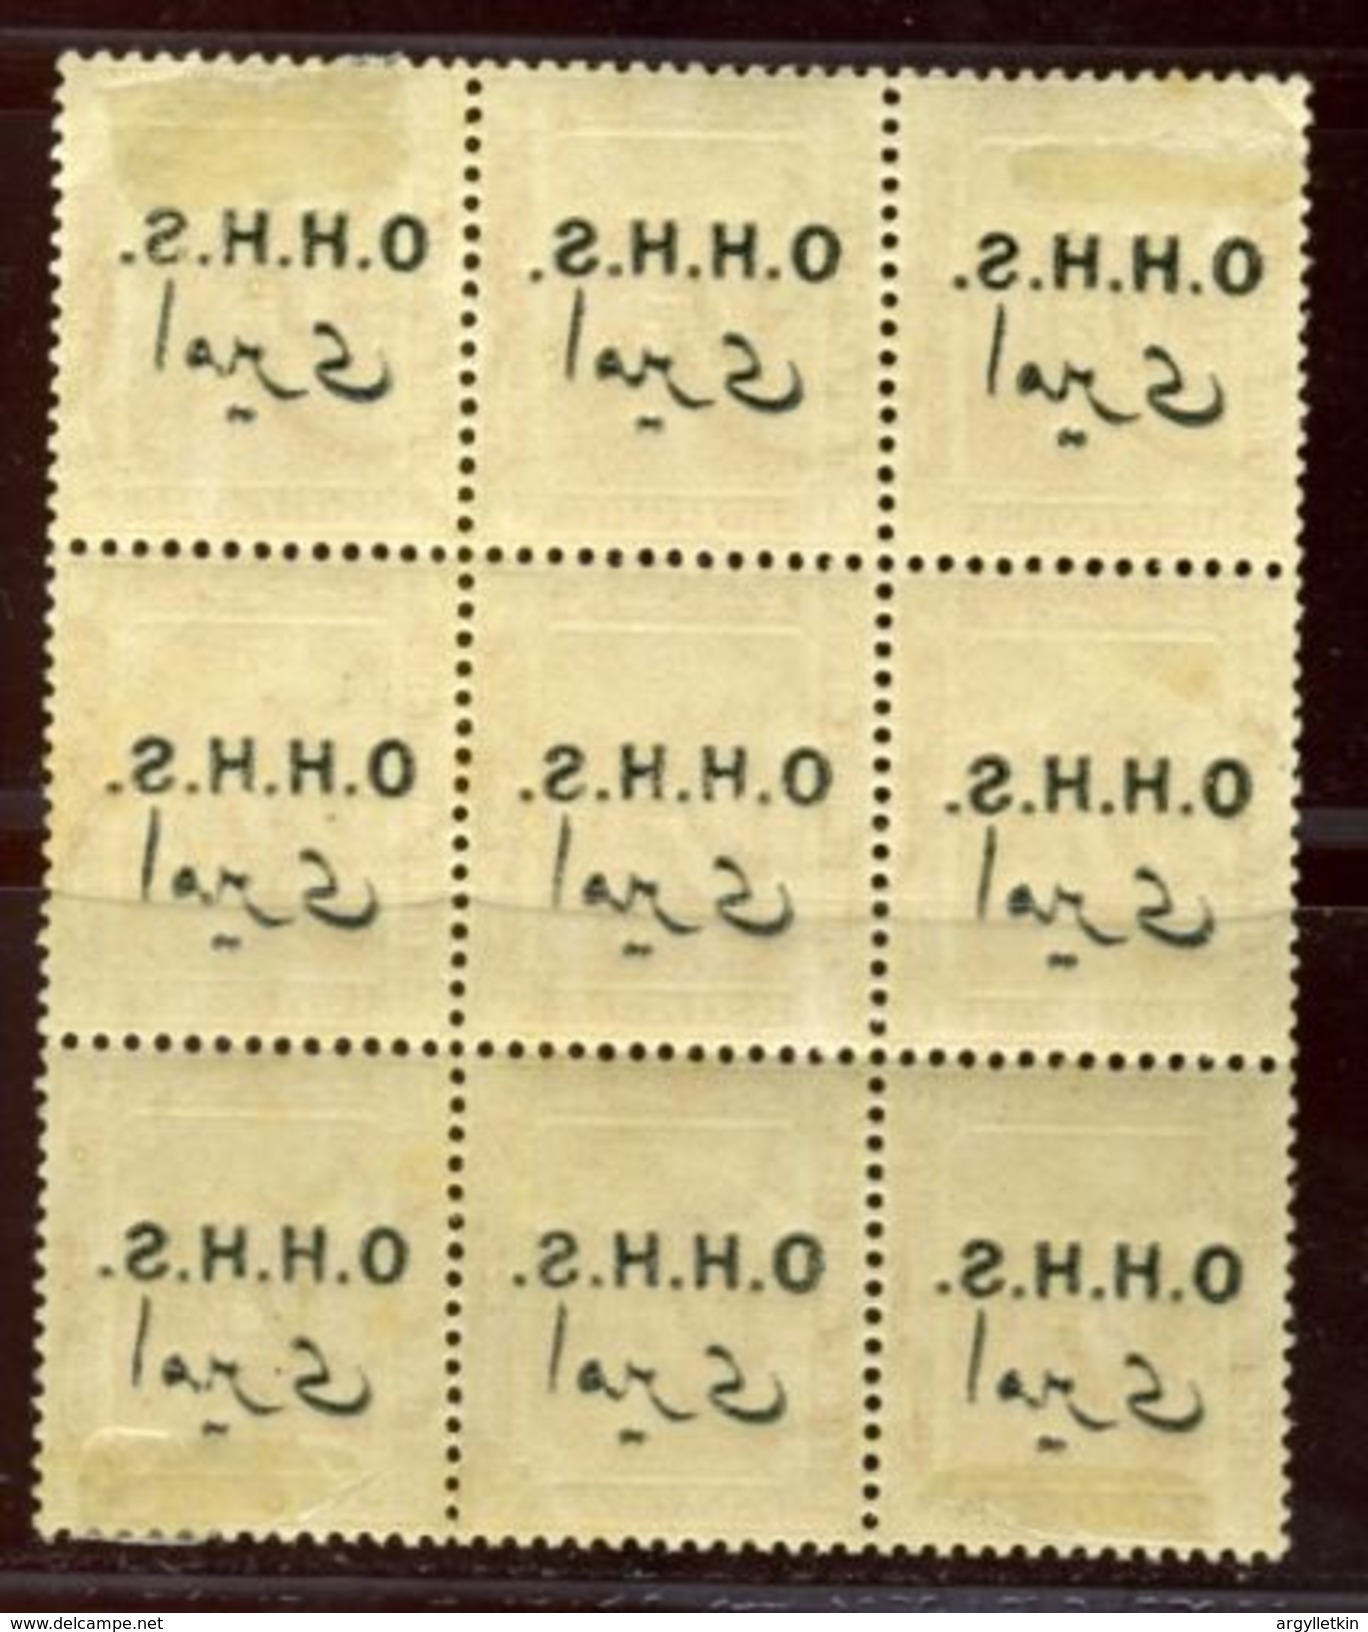 EGYPT 1914-15 OFFICIAL 3m BLOCK WITH OFFSET - Blocs-feuillets